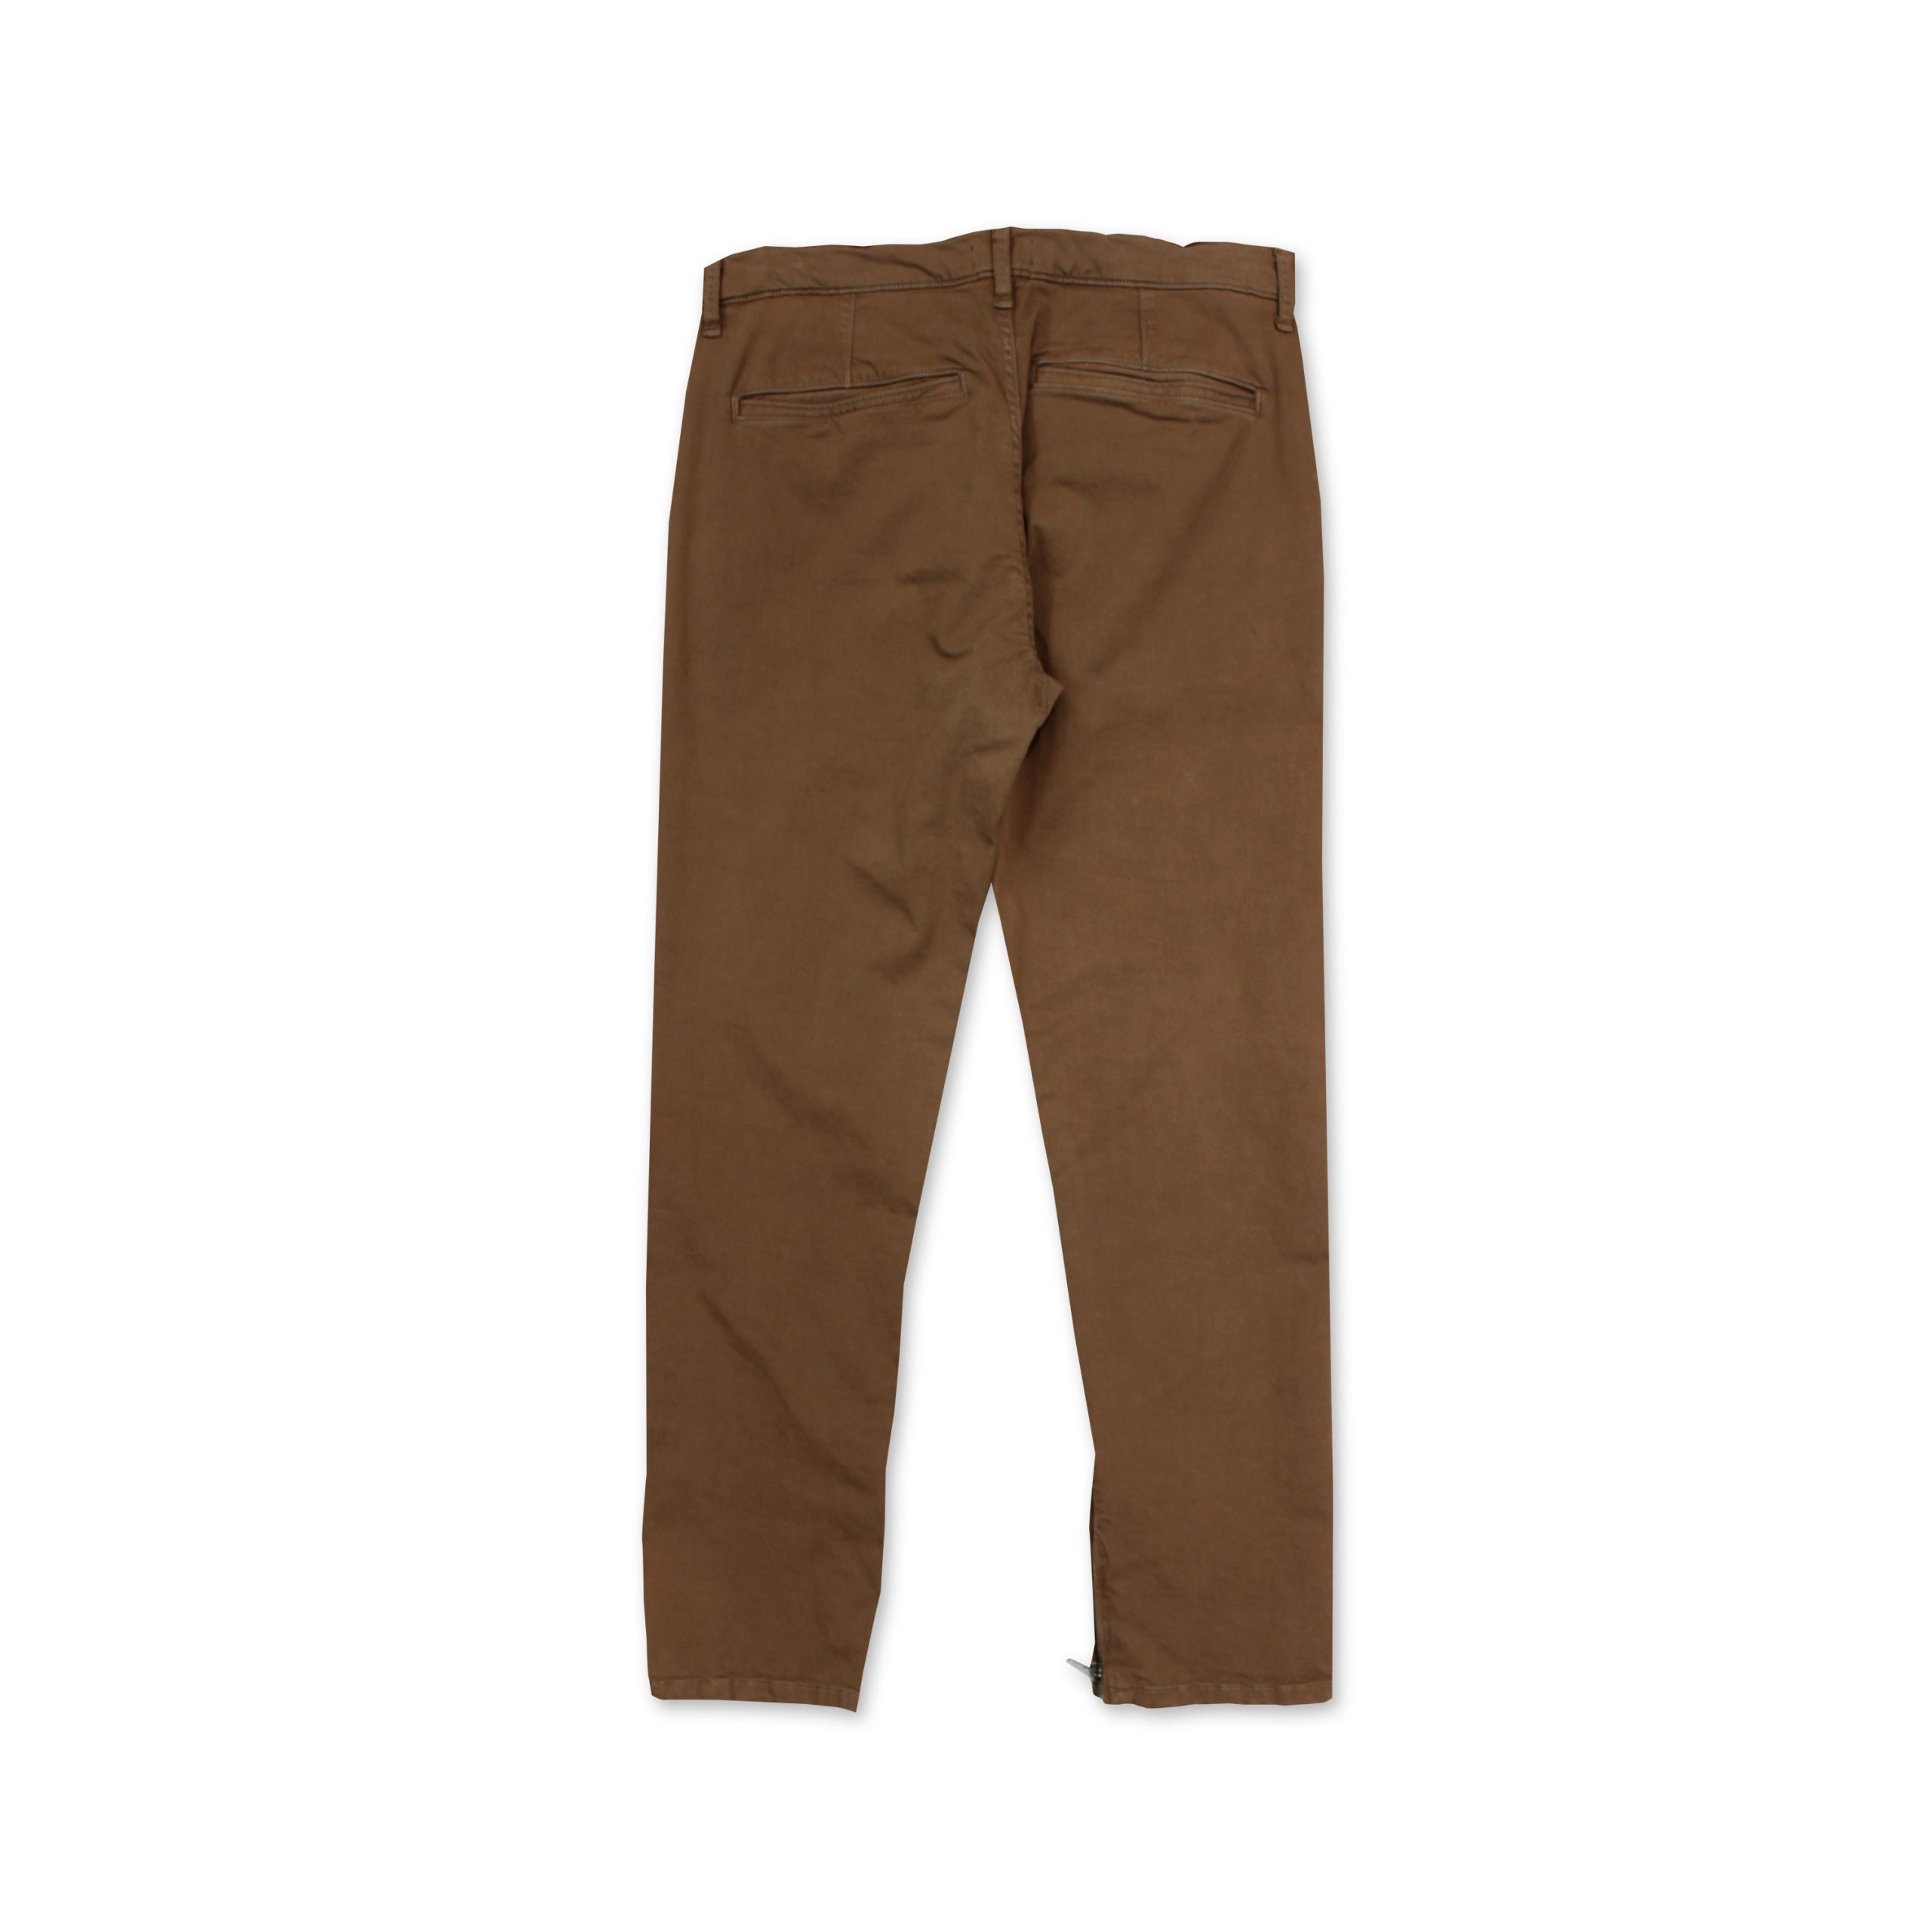 Chino Pants with Zipper at Ankle – AMFM